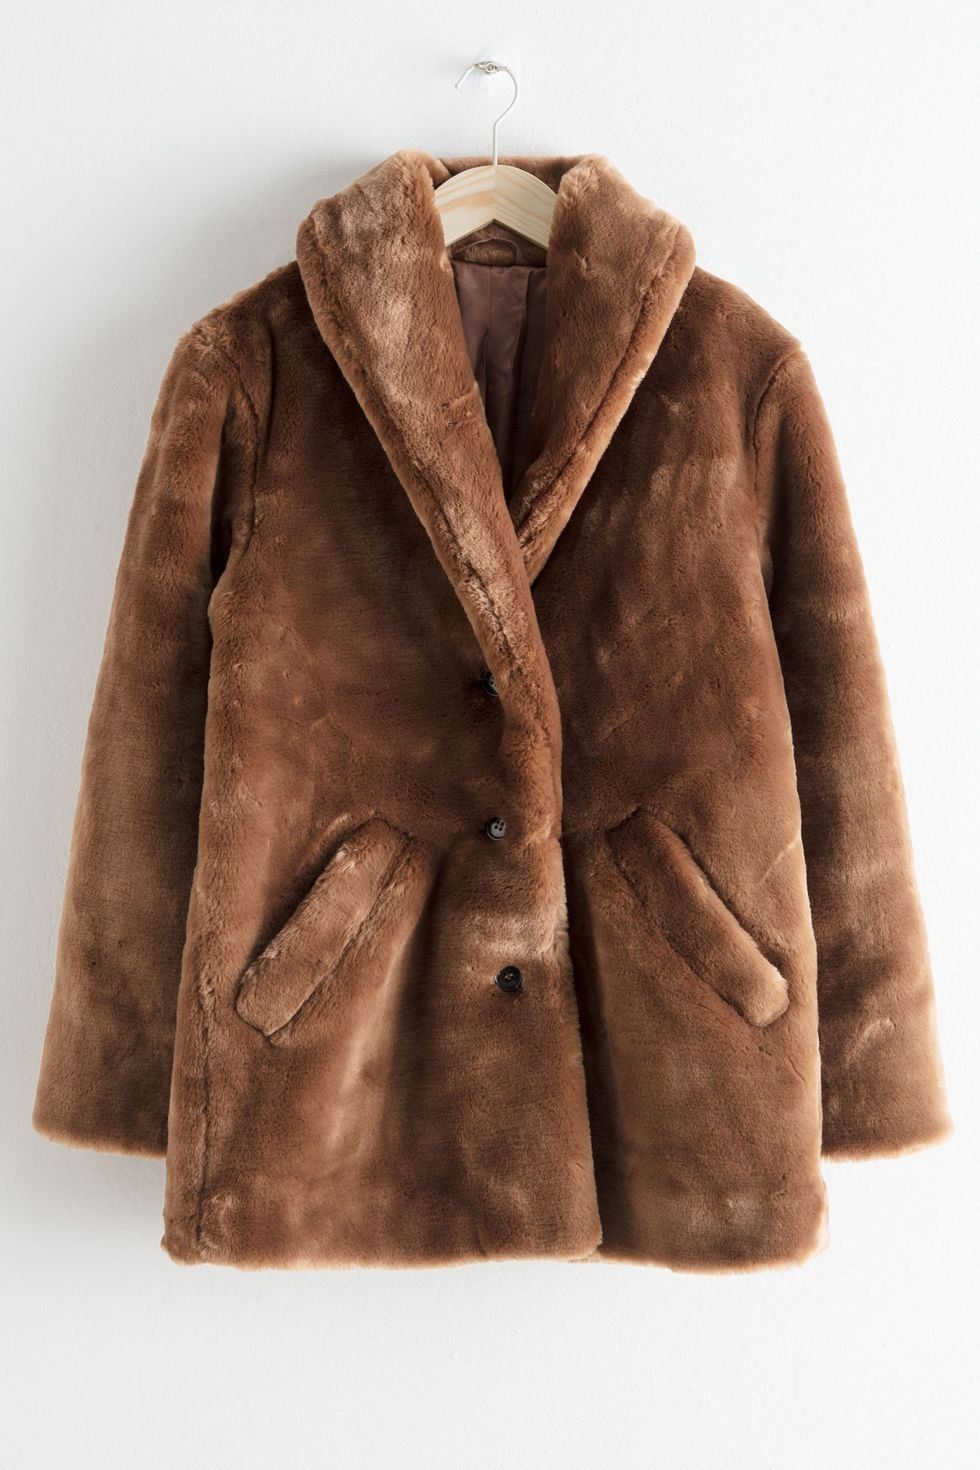 Clothing, Fur clothing, Outerwear, Fur, Brown, Coat, Sleeve, Jacket, Overcoat, Textile, 